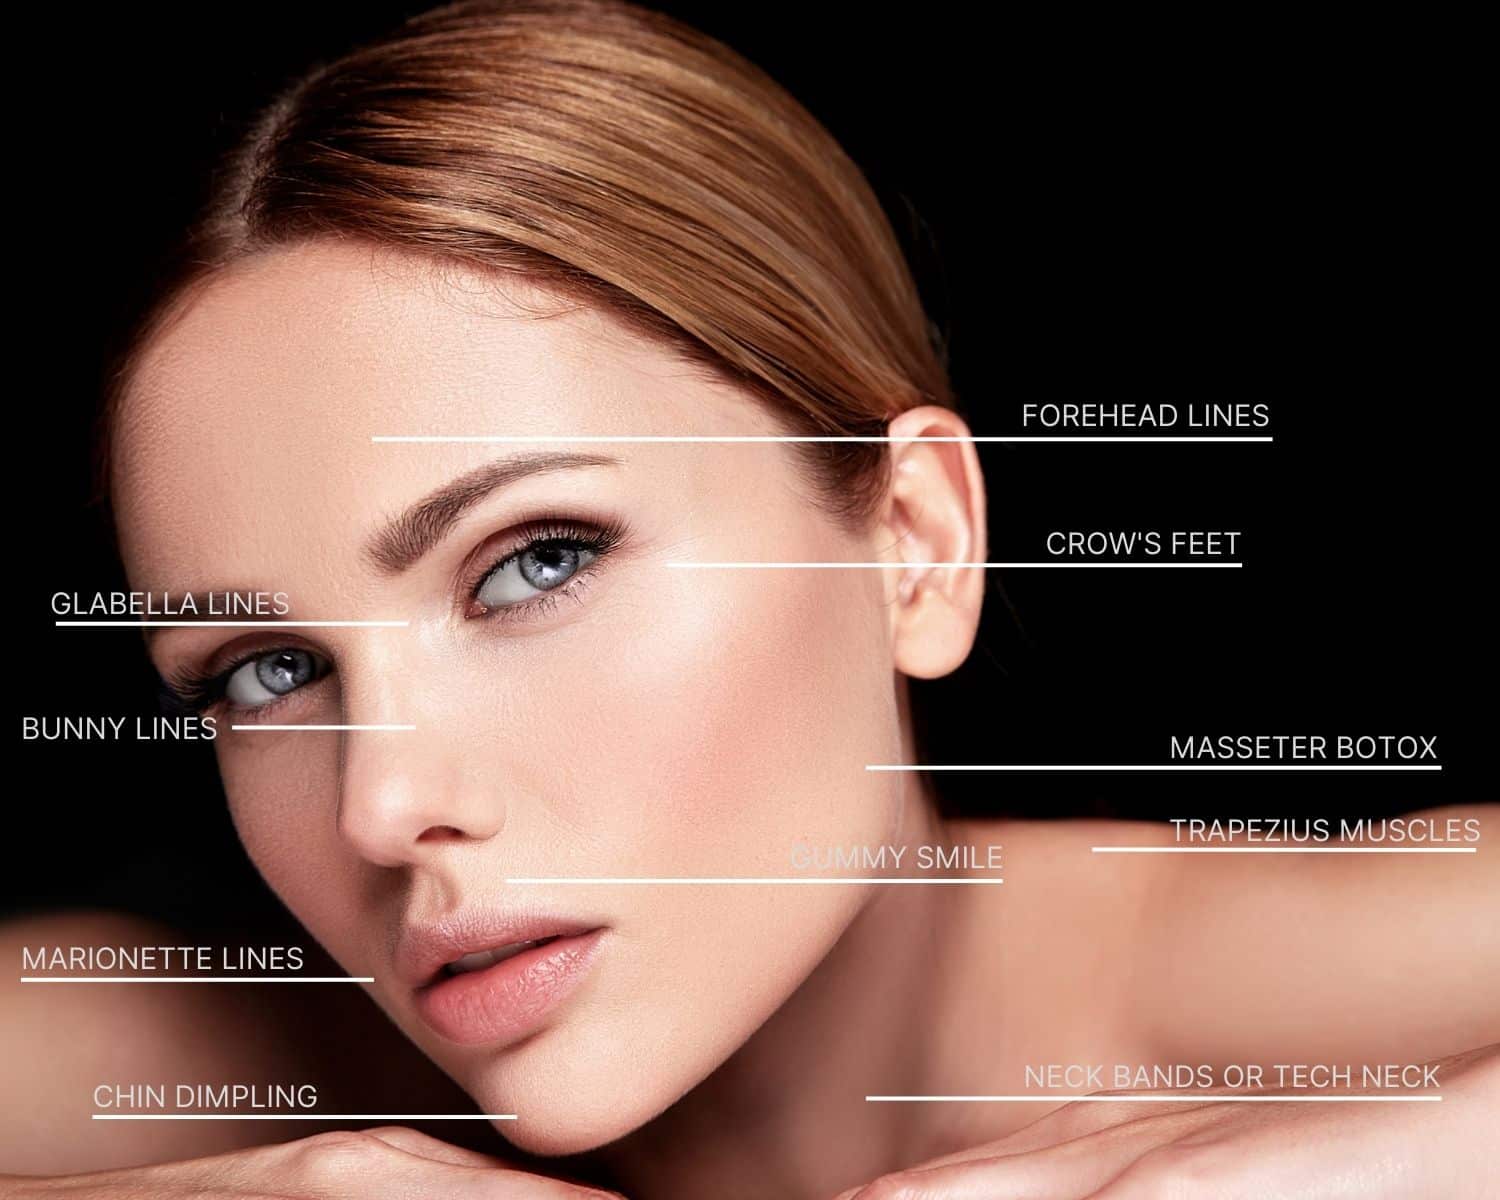 An image of a woman showing the treatment areas of a Botox injection in Naples, FL